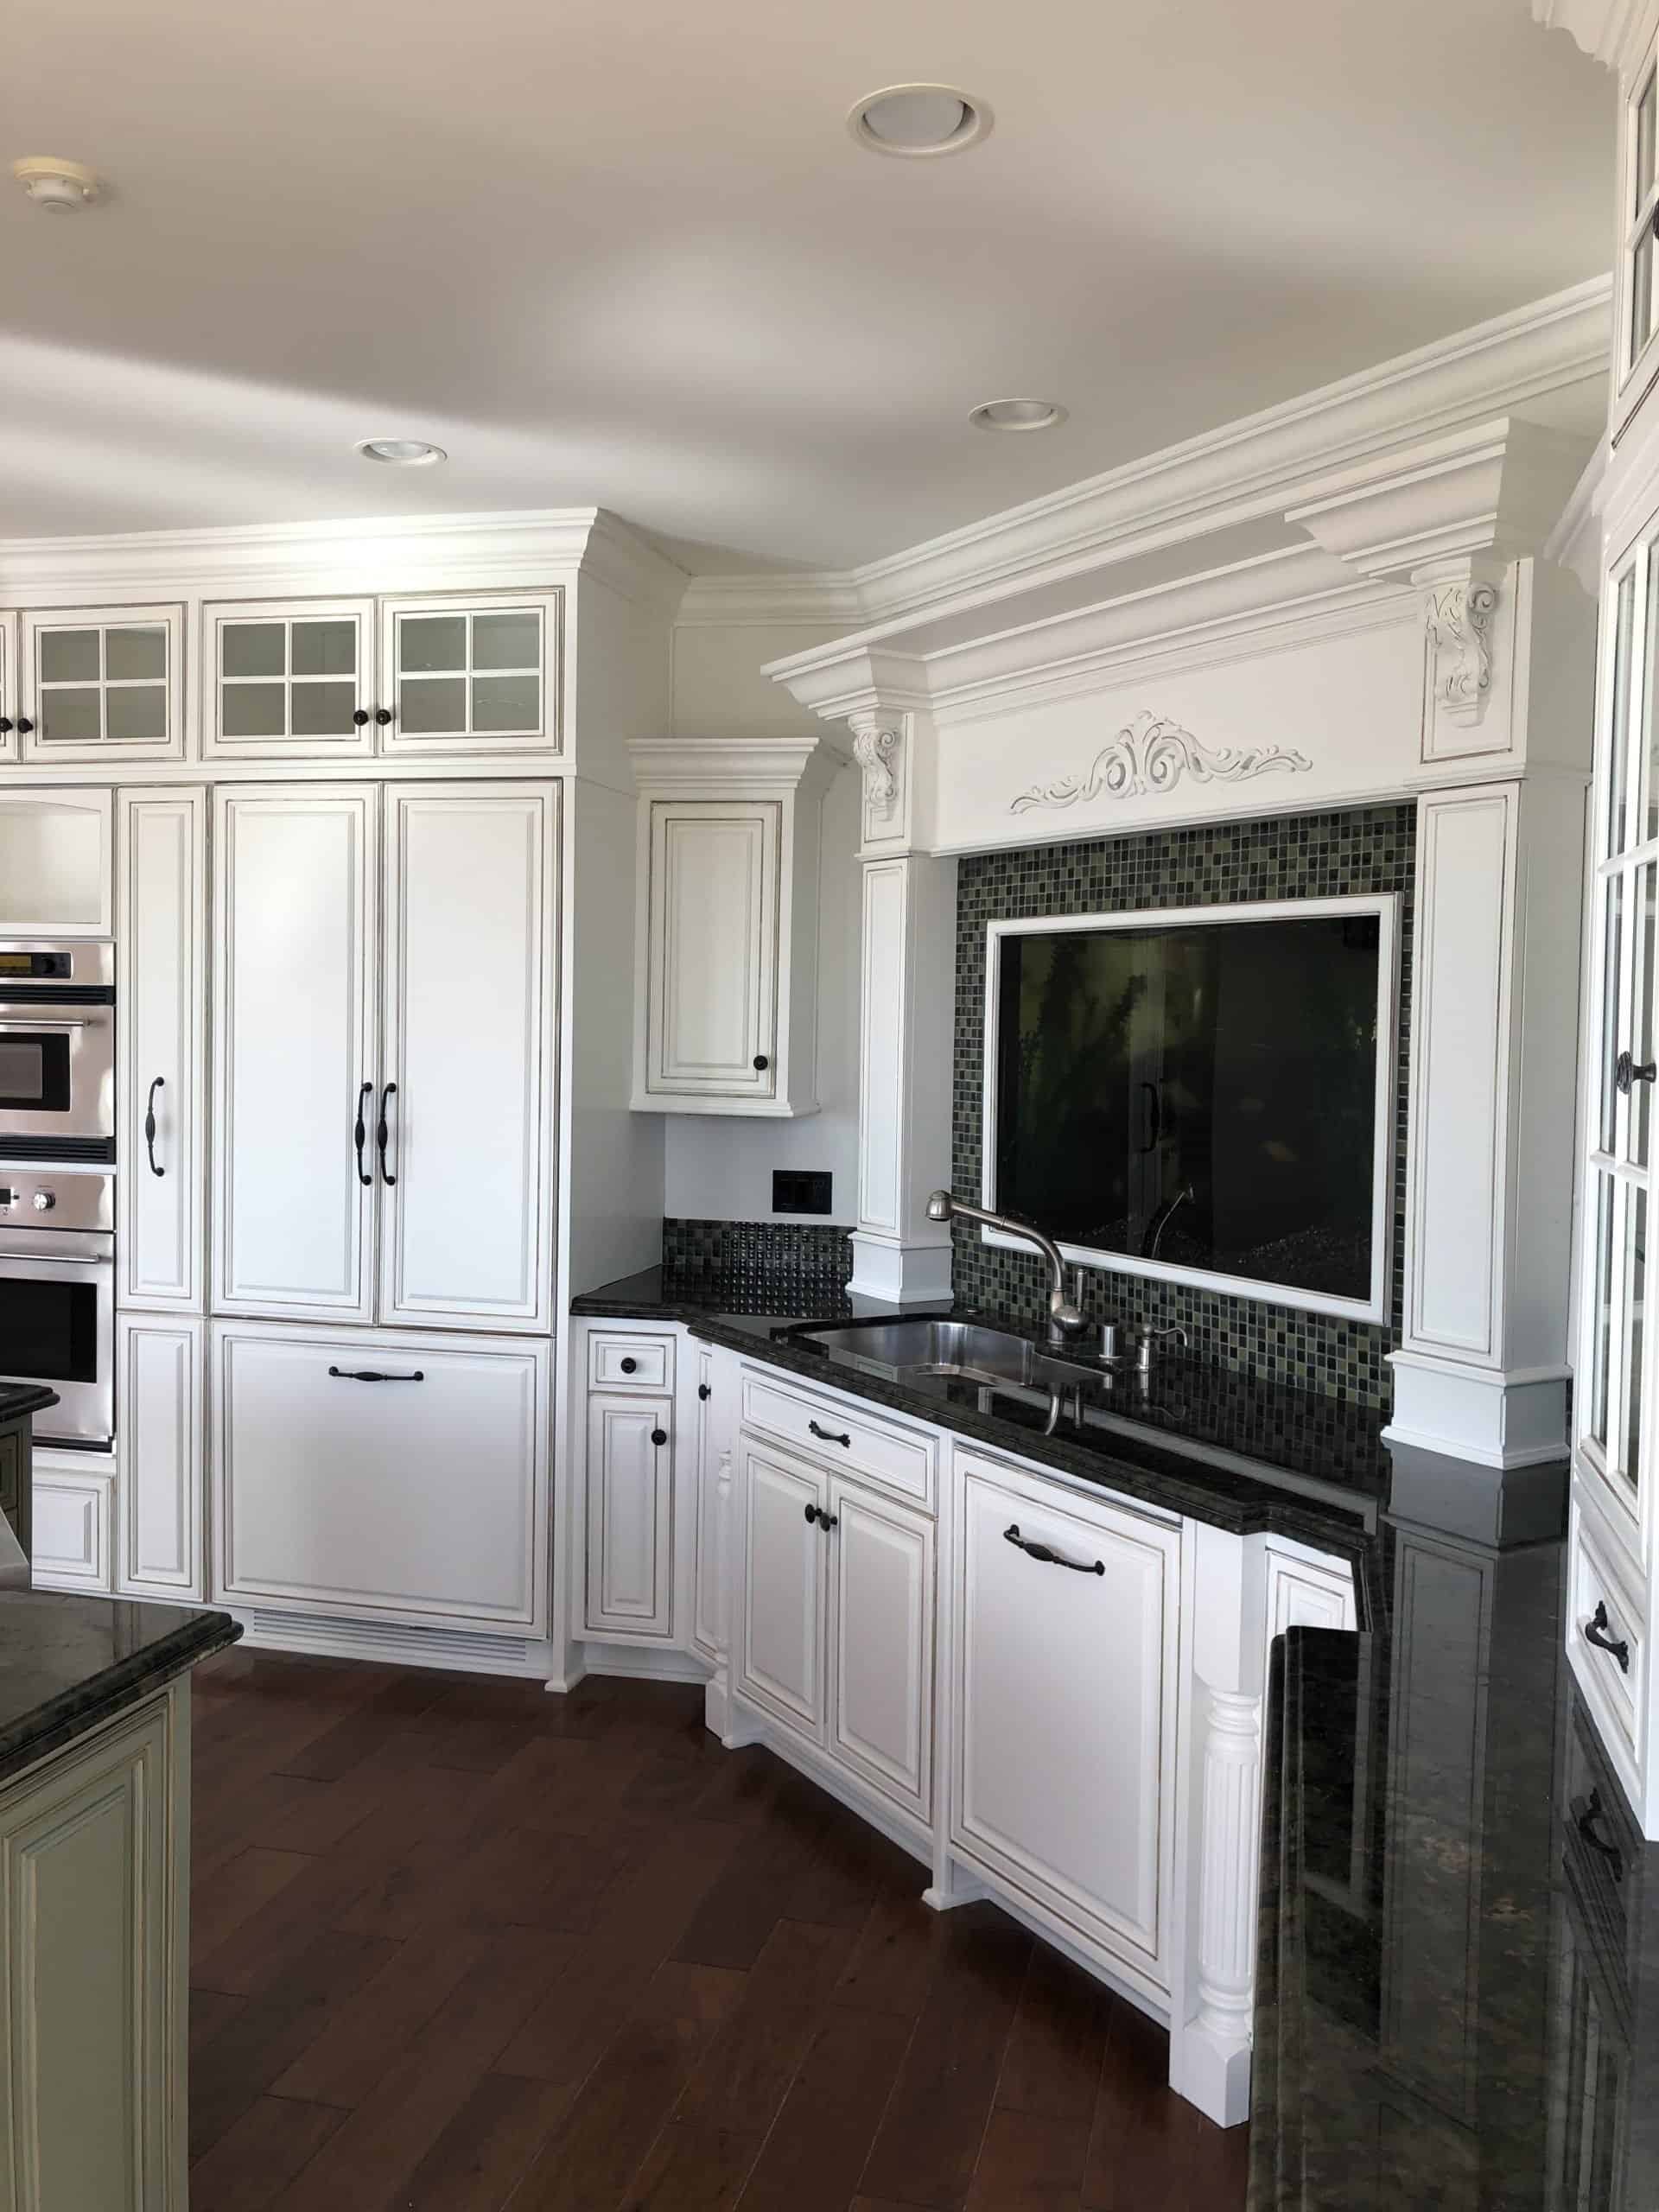 Refinished White Kitchen Cabinets Completed Project